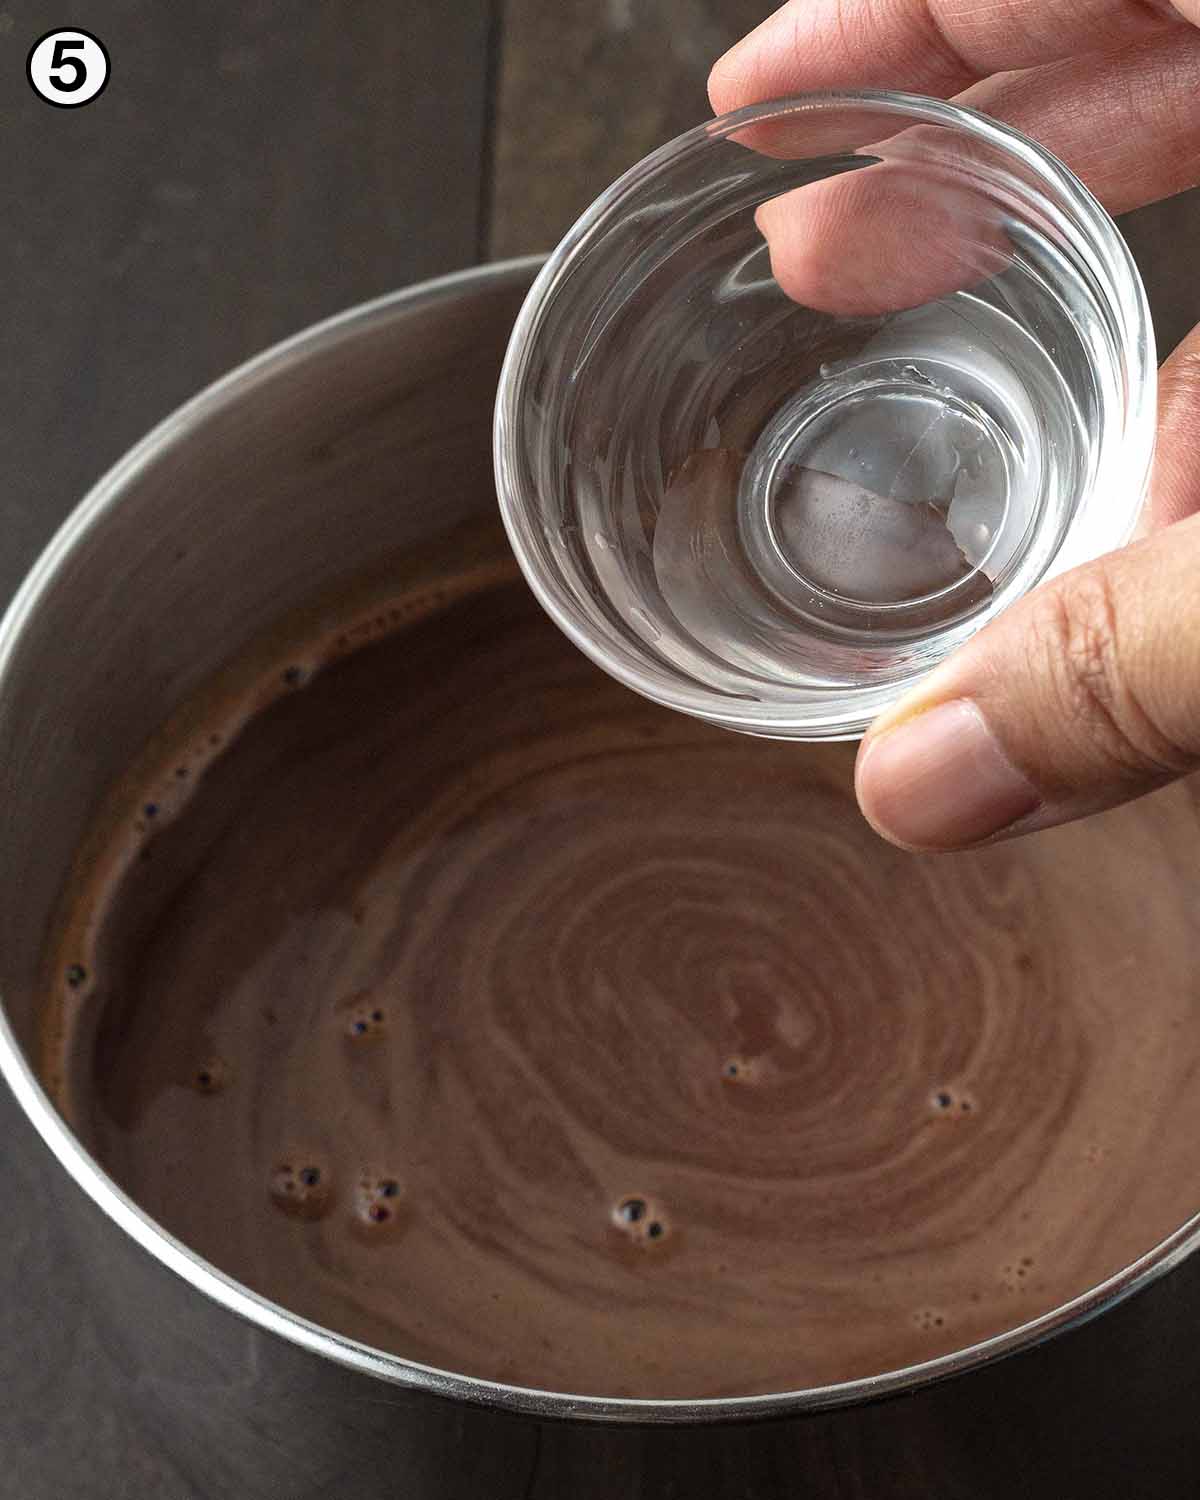 A hand pouring peppermint extract from a small glass bowl into a pot of hot chocolate.